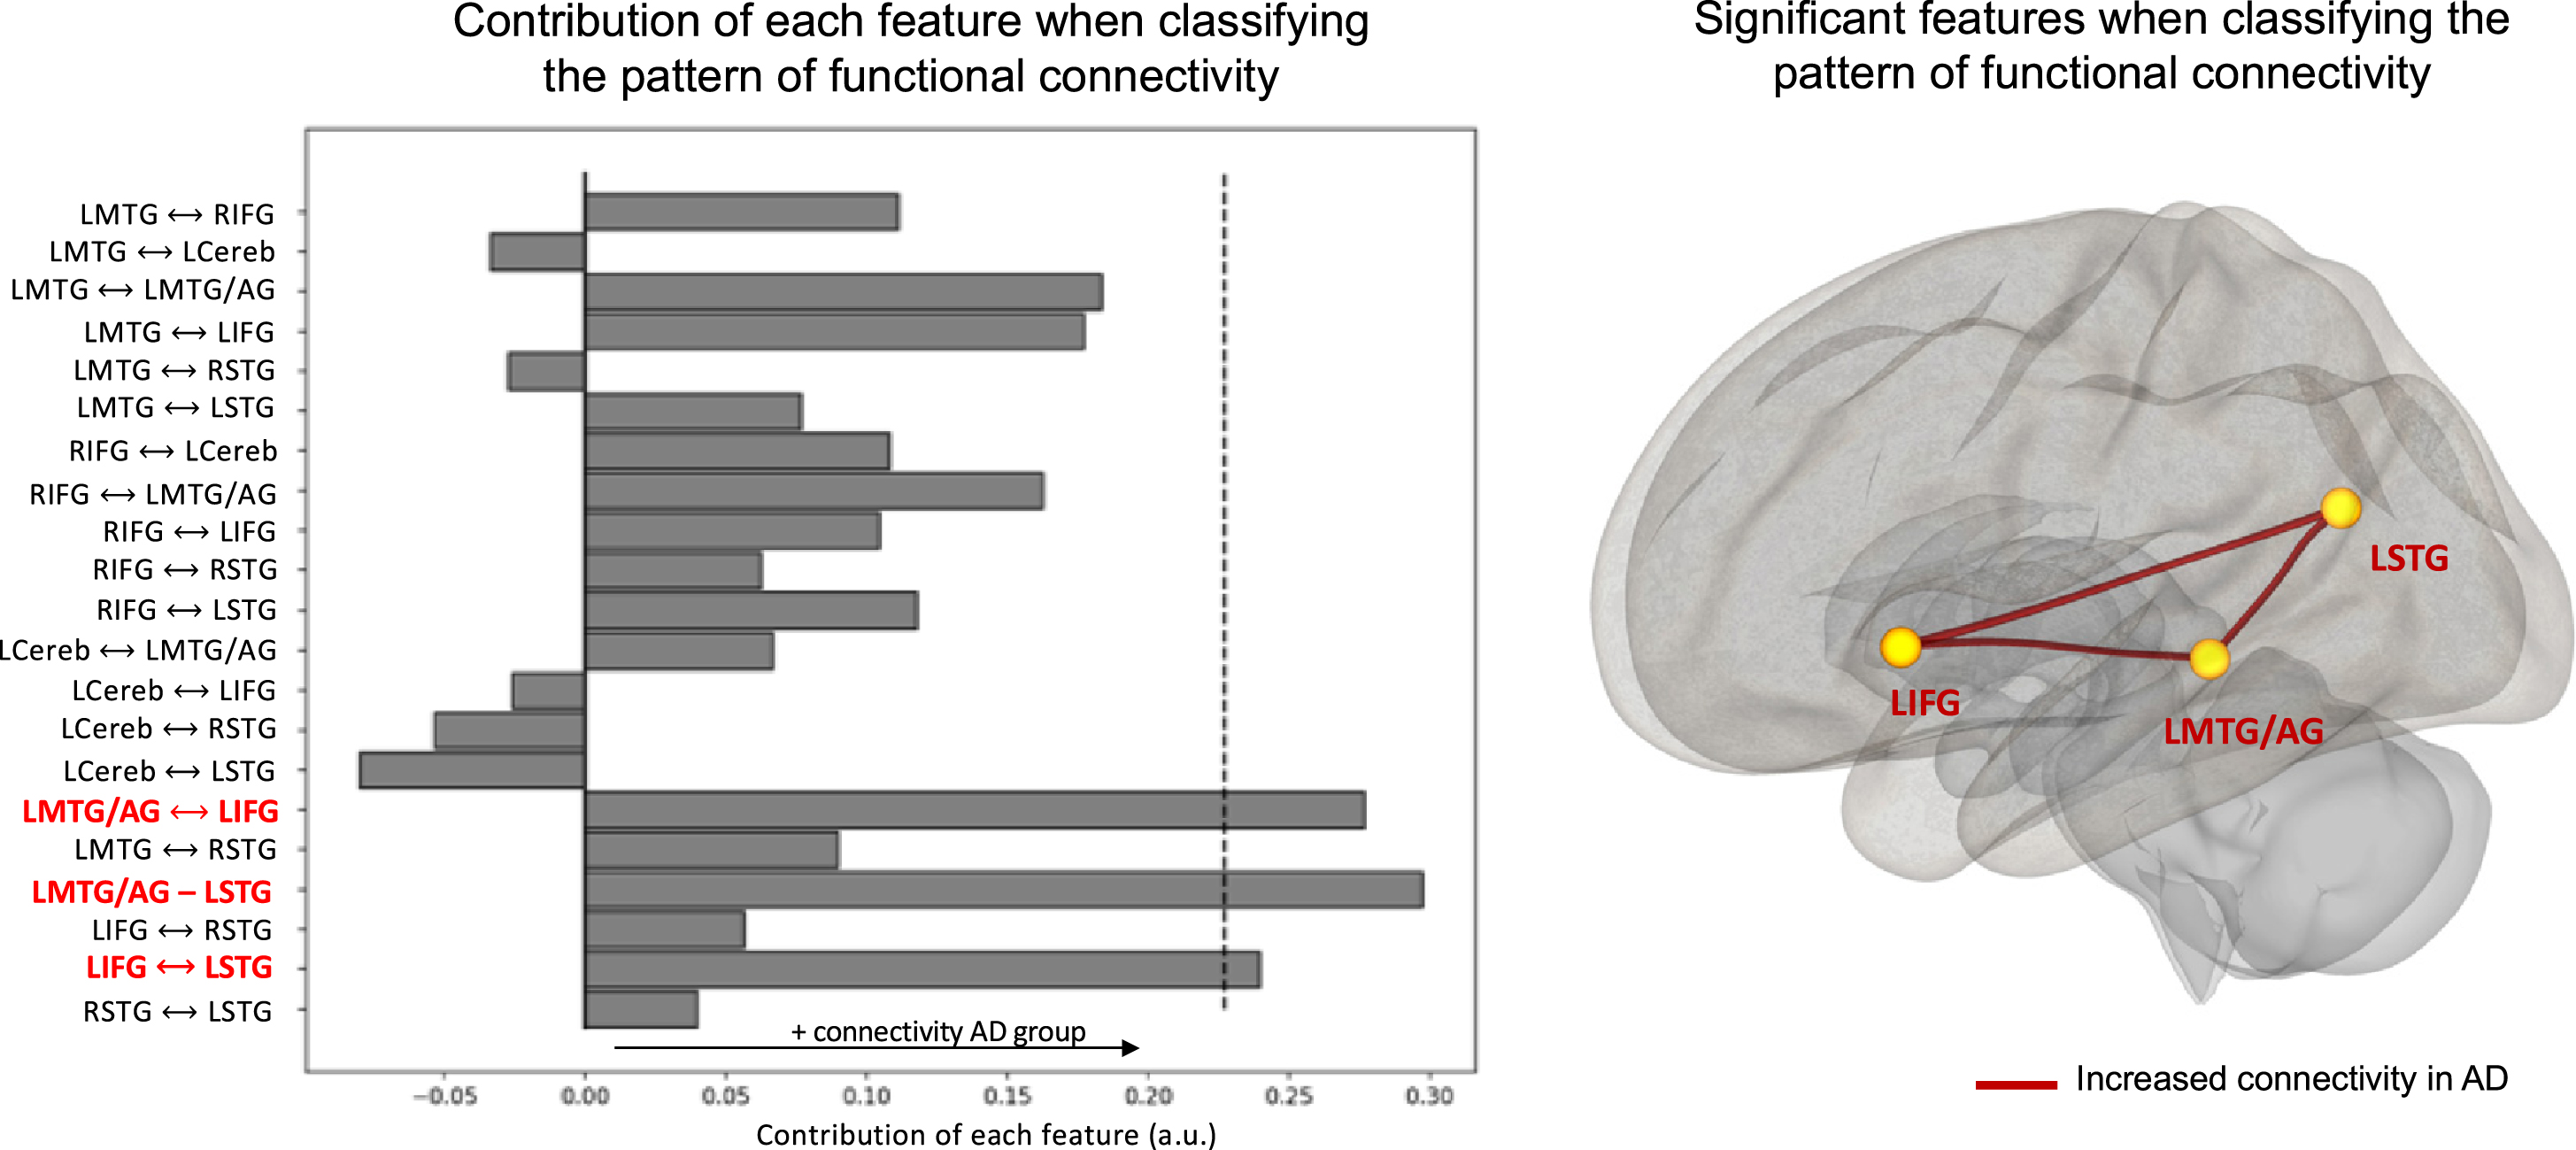 Contribution of each feature when classifying the pattern of atrophy within language network. The dashed lines represent the threshold (p < 0.05) for significance obtained through permutations. Significant features are indicated in bold on the y-axis. Only the main area of each ROI is displayed on the y-axis. LMTG, left middle temporal gyrus; LMTG/AG, left middle temporal/angular gyrus; LSTG, left middle/superior/supramarginal gyrus; RSTG, right middle/superior/ supramarginal gyrus, LCereb, left cerebellum.